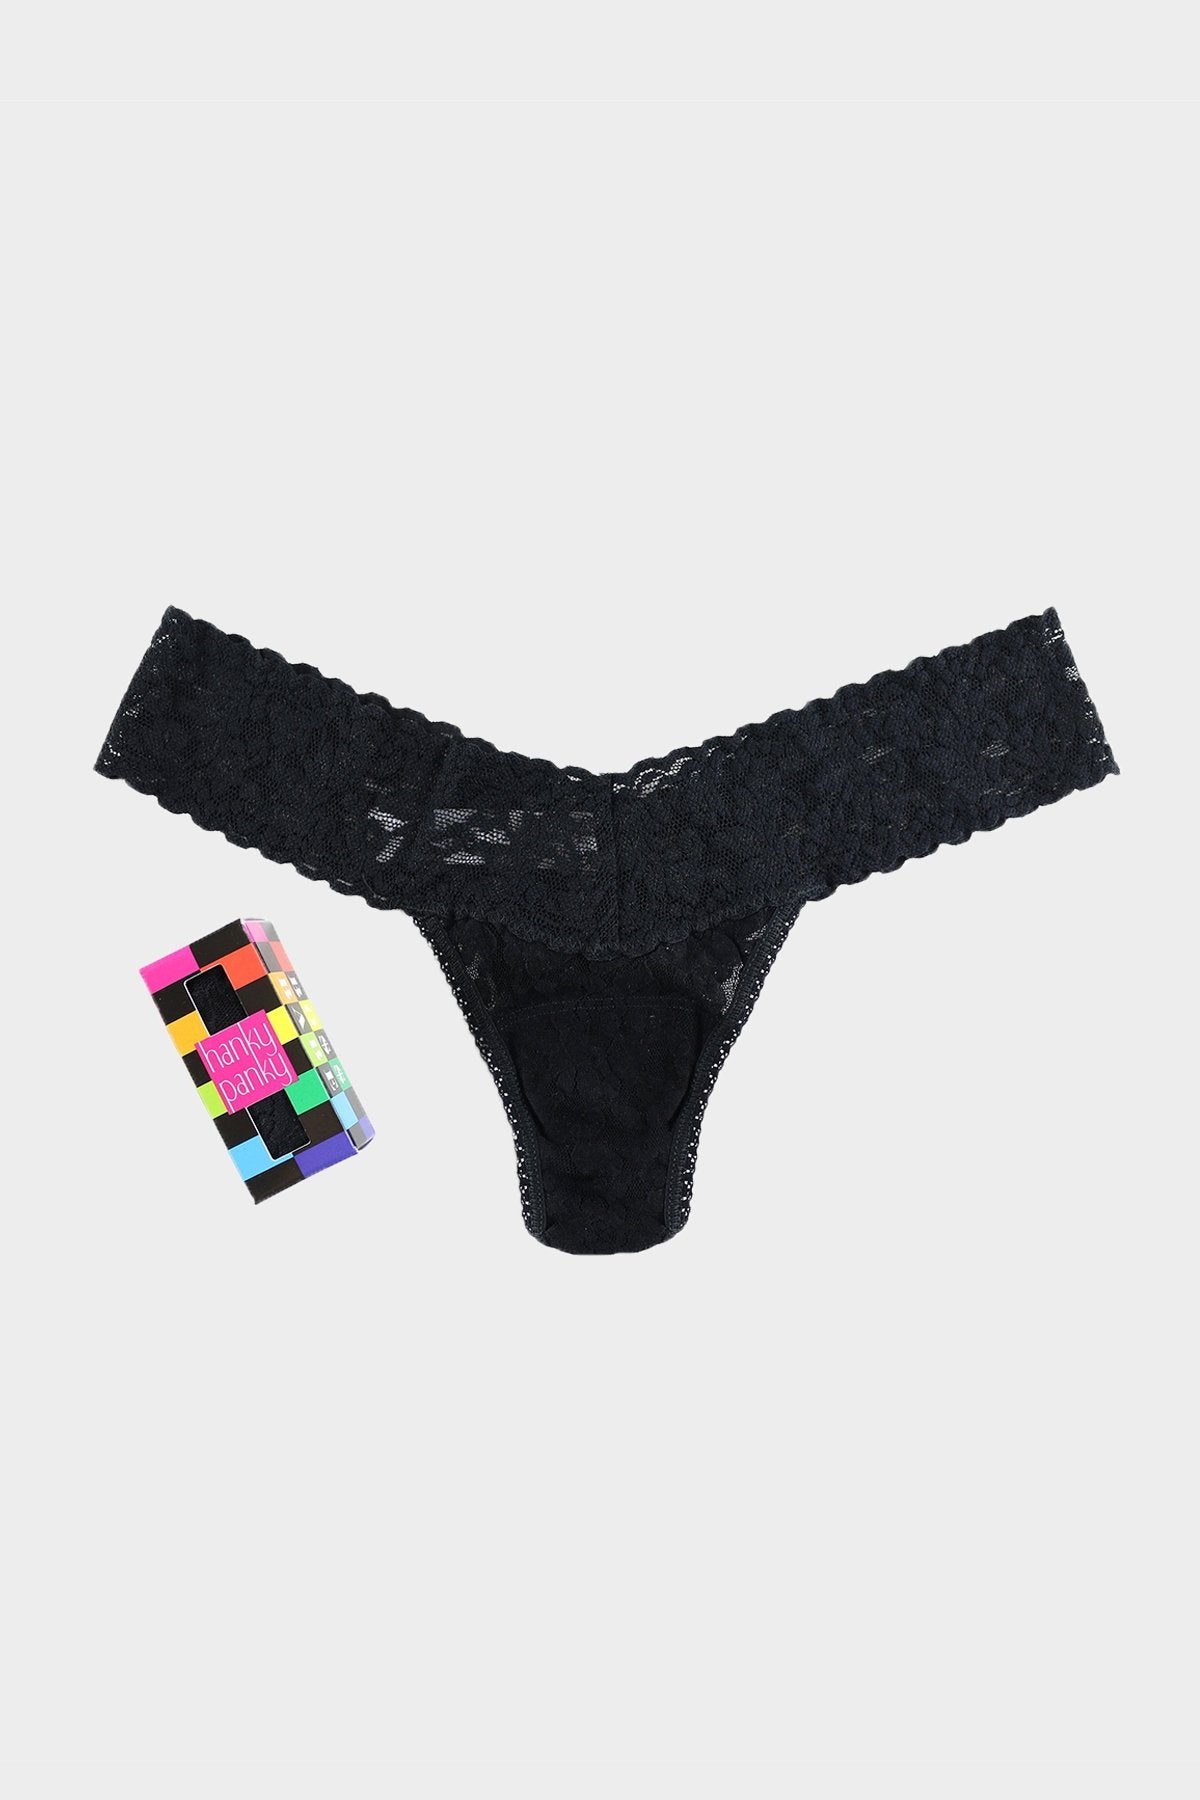 Occasions Box Low Rise Thong in Black - shop-olivia.com